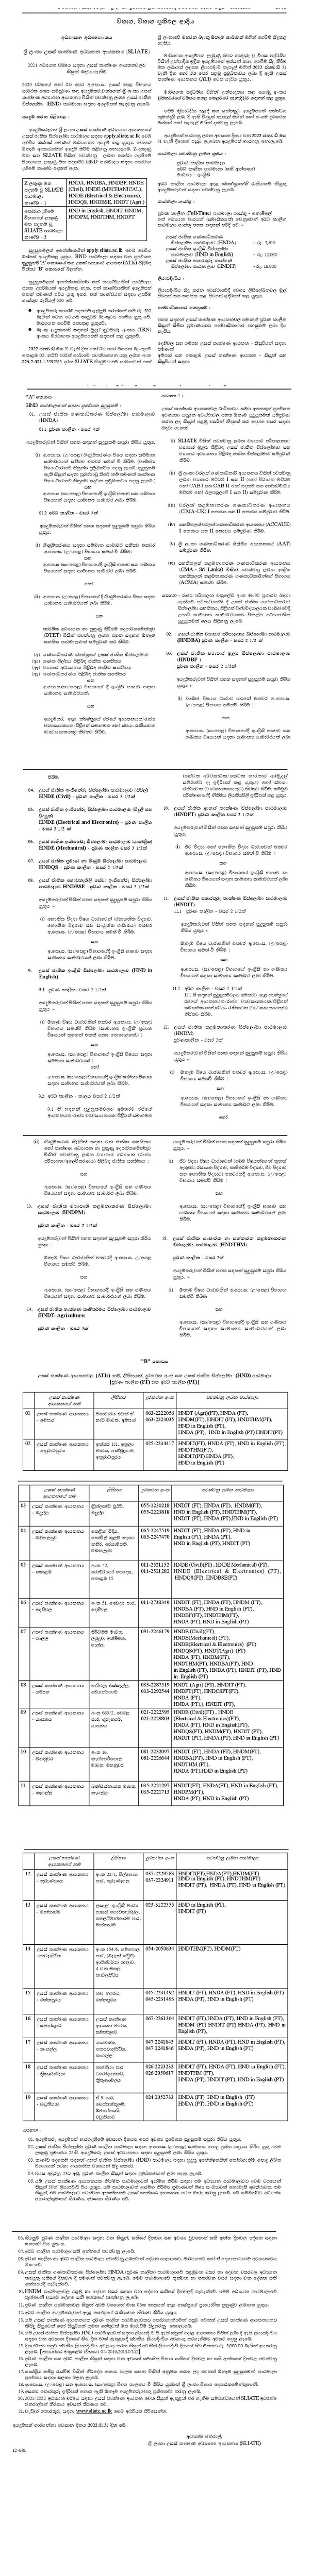 Admission of Students to Advanced Technological Institutions for the Academic Year 2021 - Sri Lanka Institute of Advanced Technological Education (SLIATE)